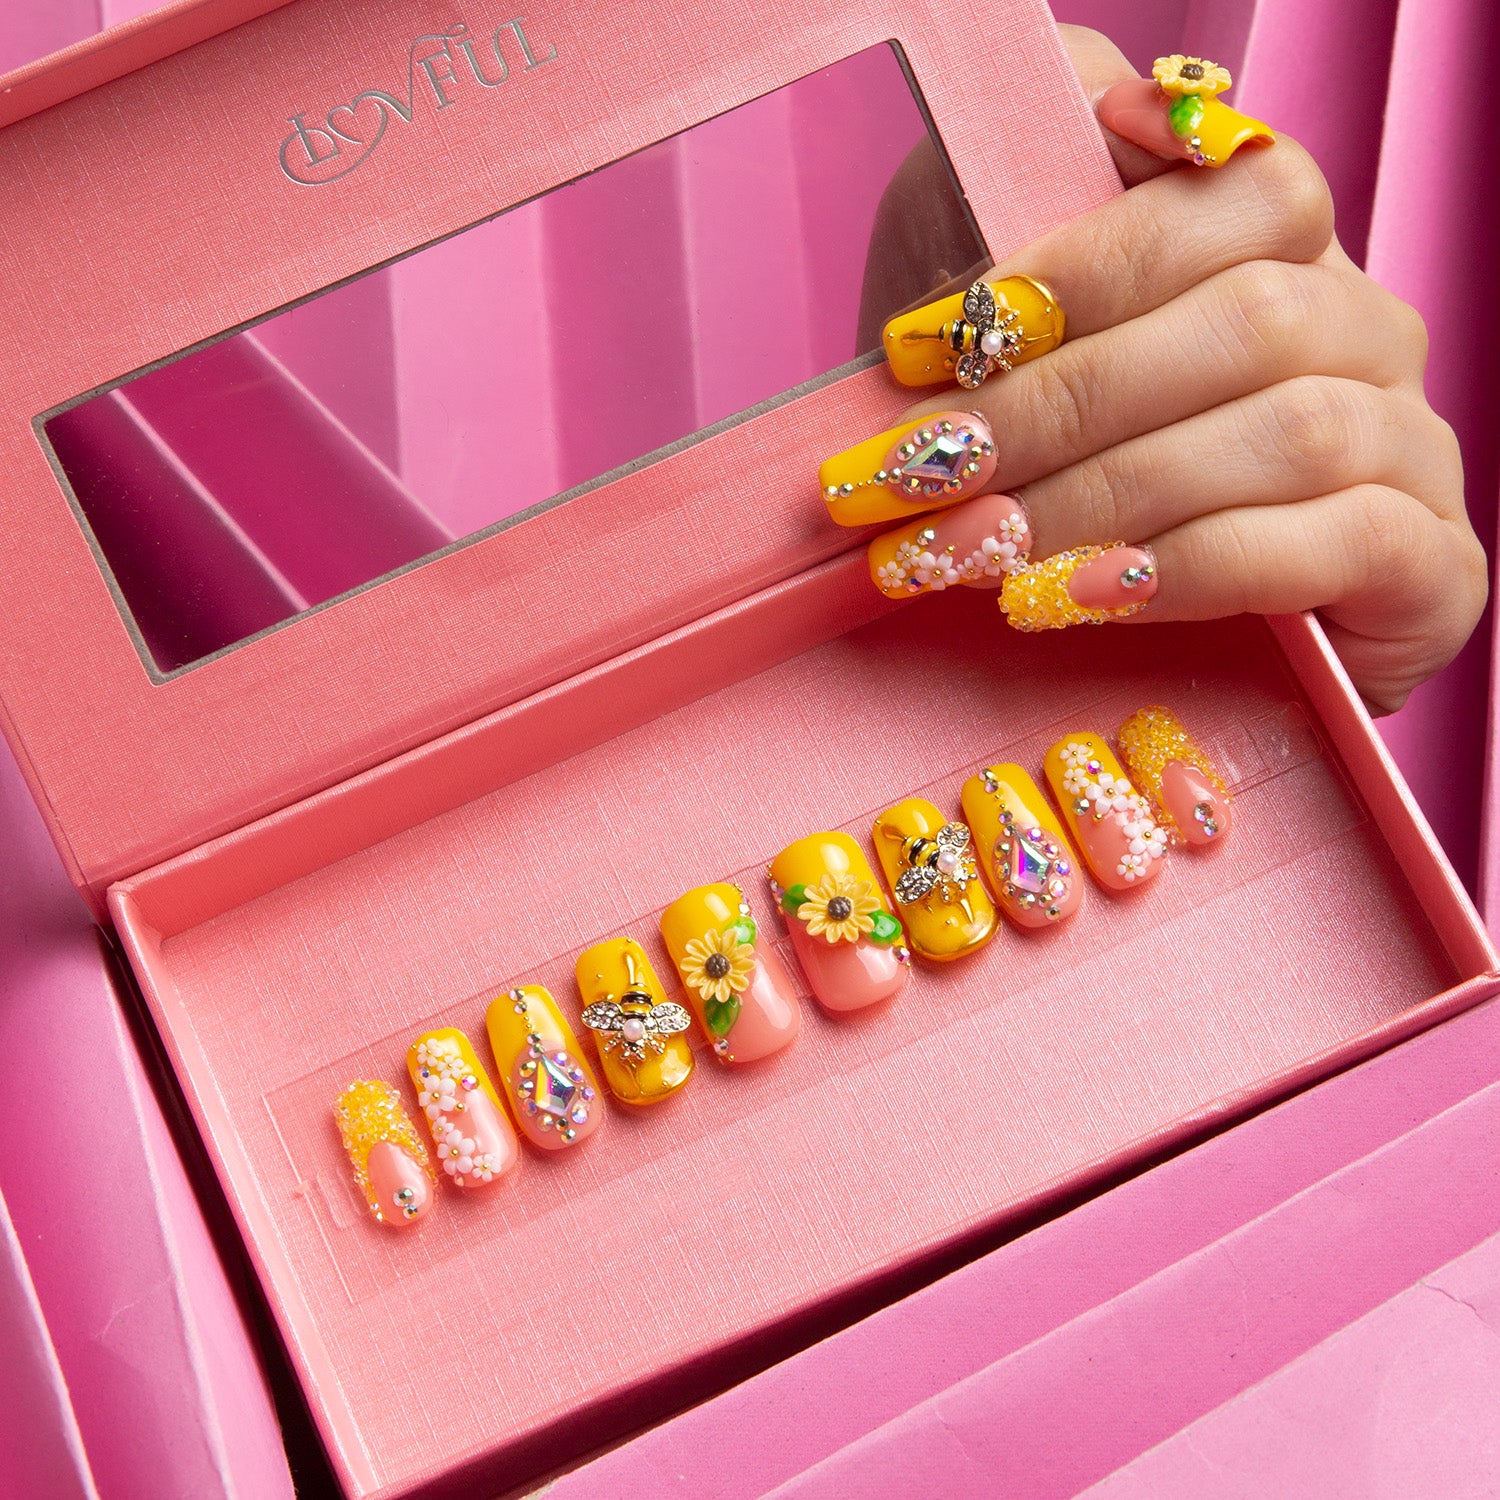 Hand displaying press-on acrylic nails with bright yellow sunflower patterns and bee accents inside a pink Lovful box, showcasing the 'Honey Bee - Square' design.